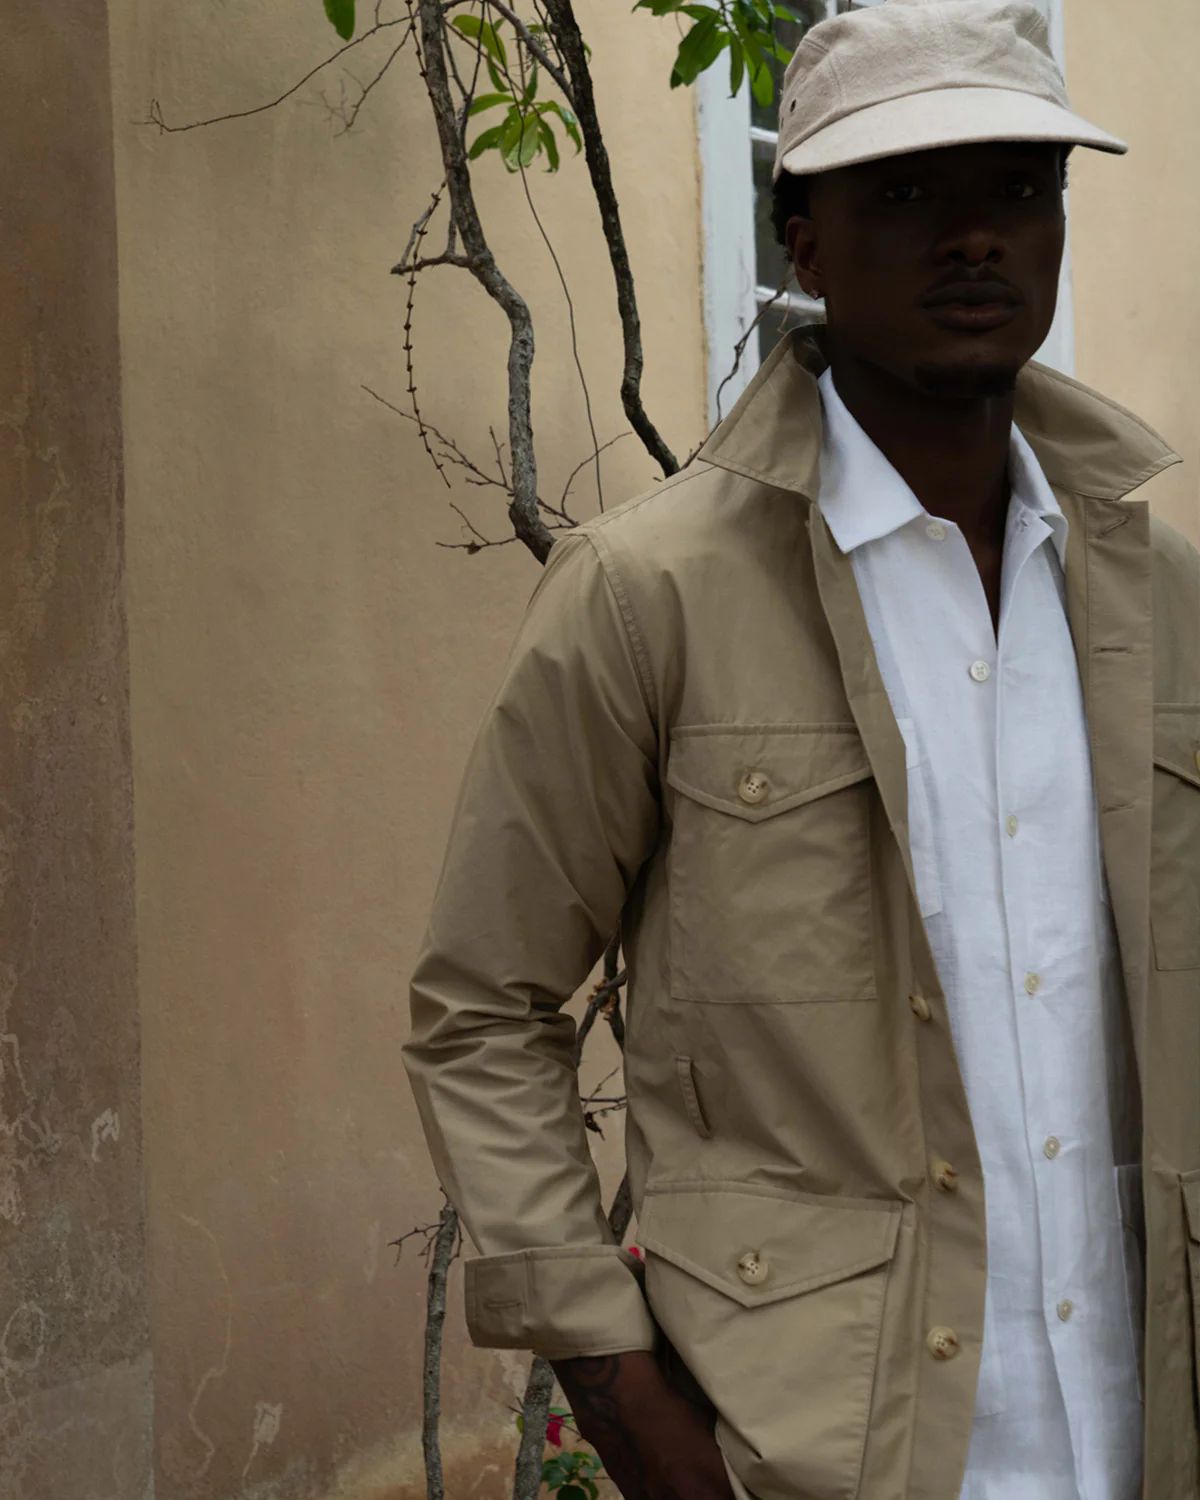 “The Safari Jacket: A Symbol of Adventure and Sophistication”